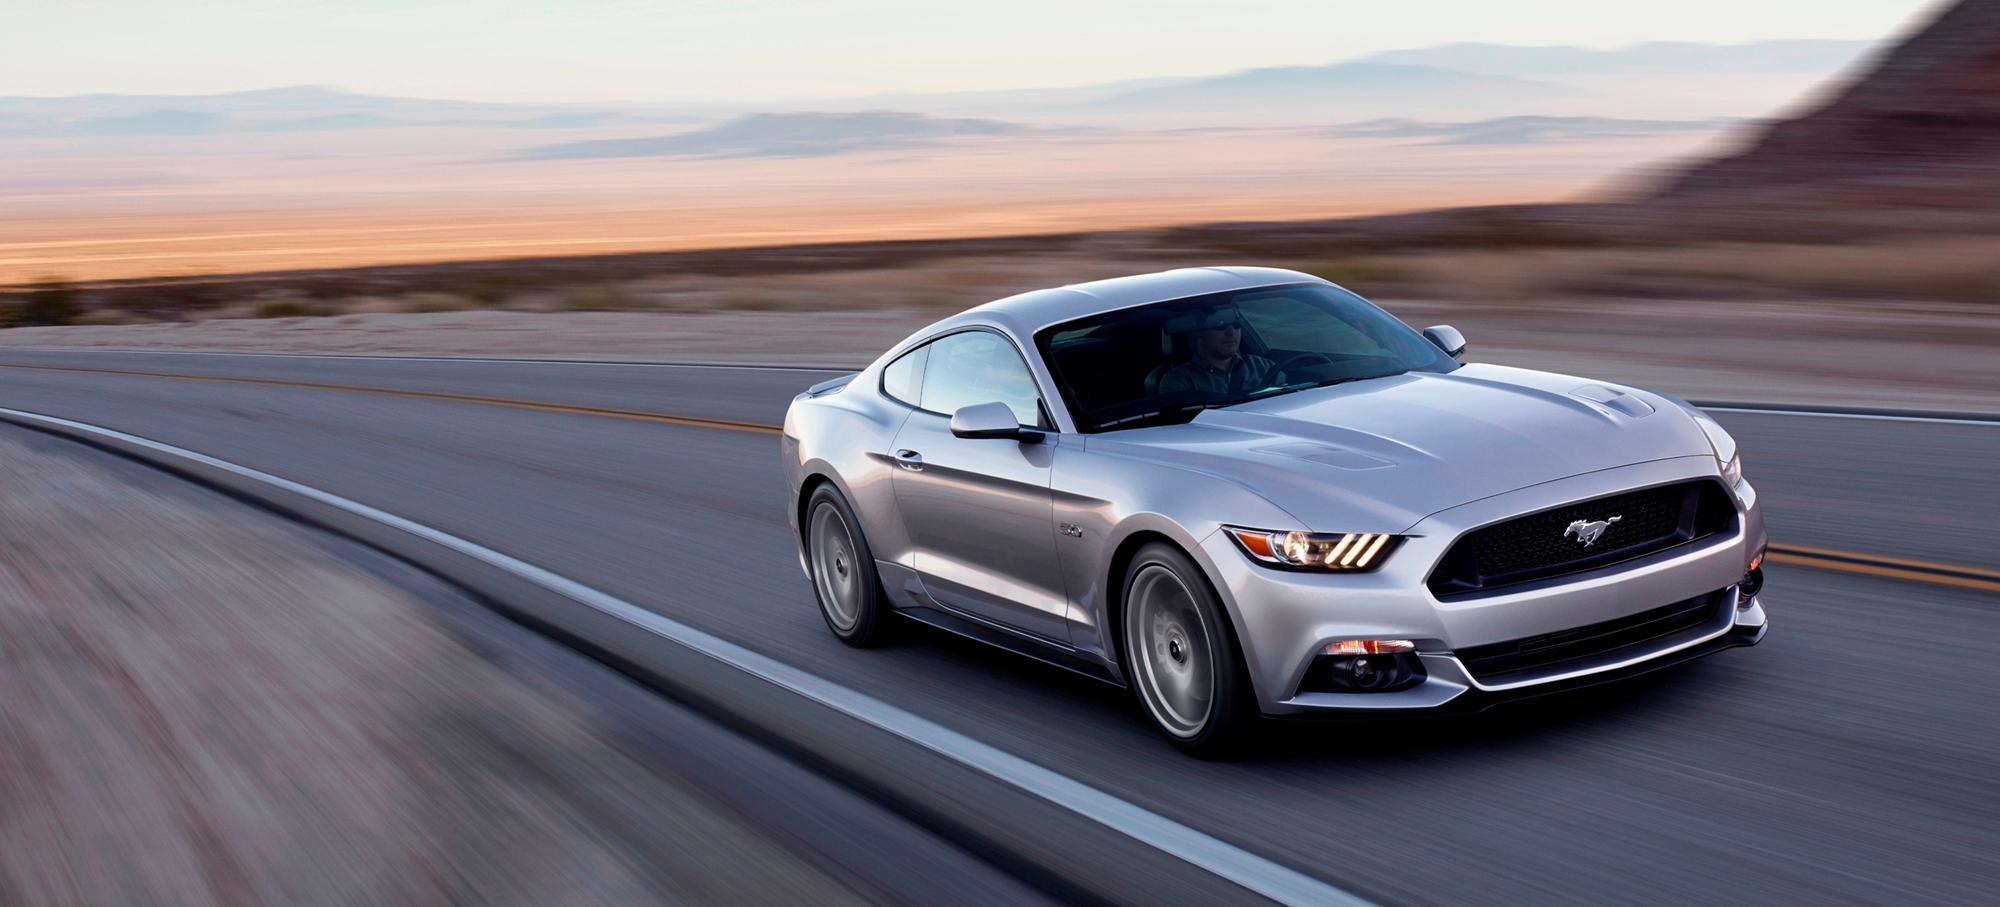 2017 Ford Mustang GT Premium Fastback Full Specs, Features and Price